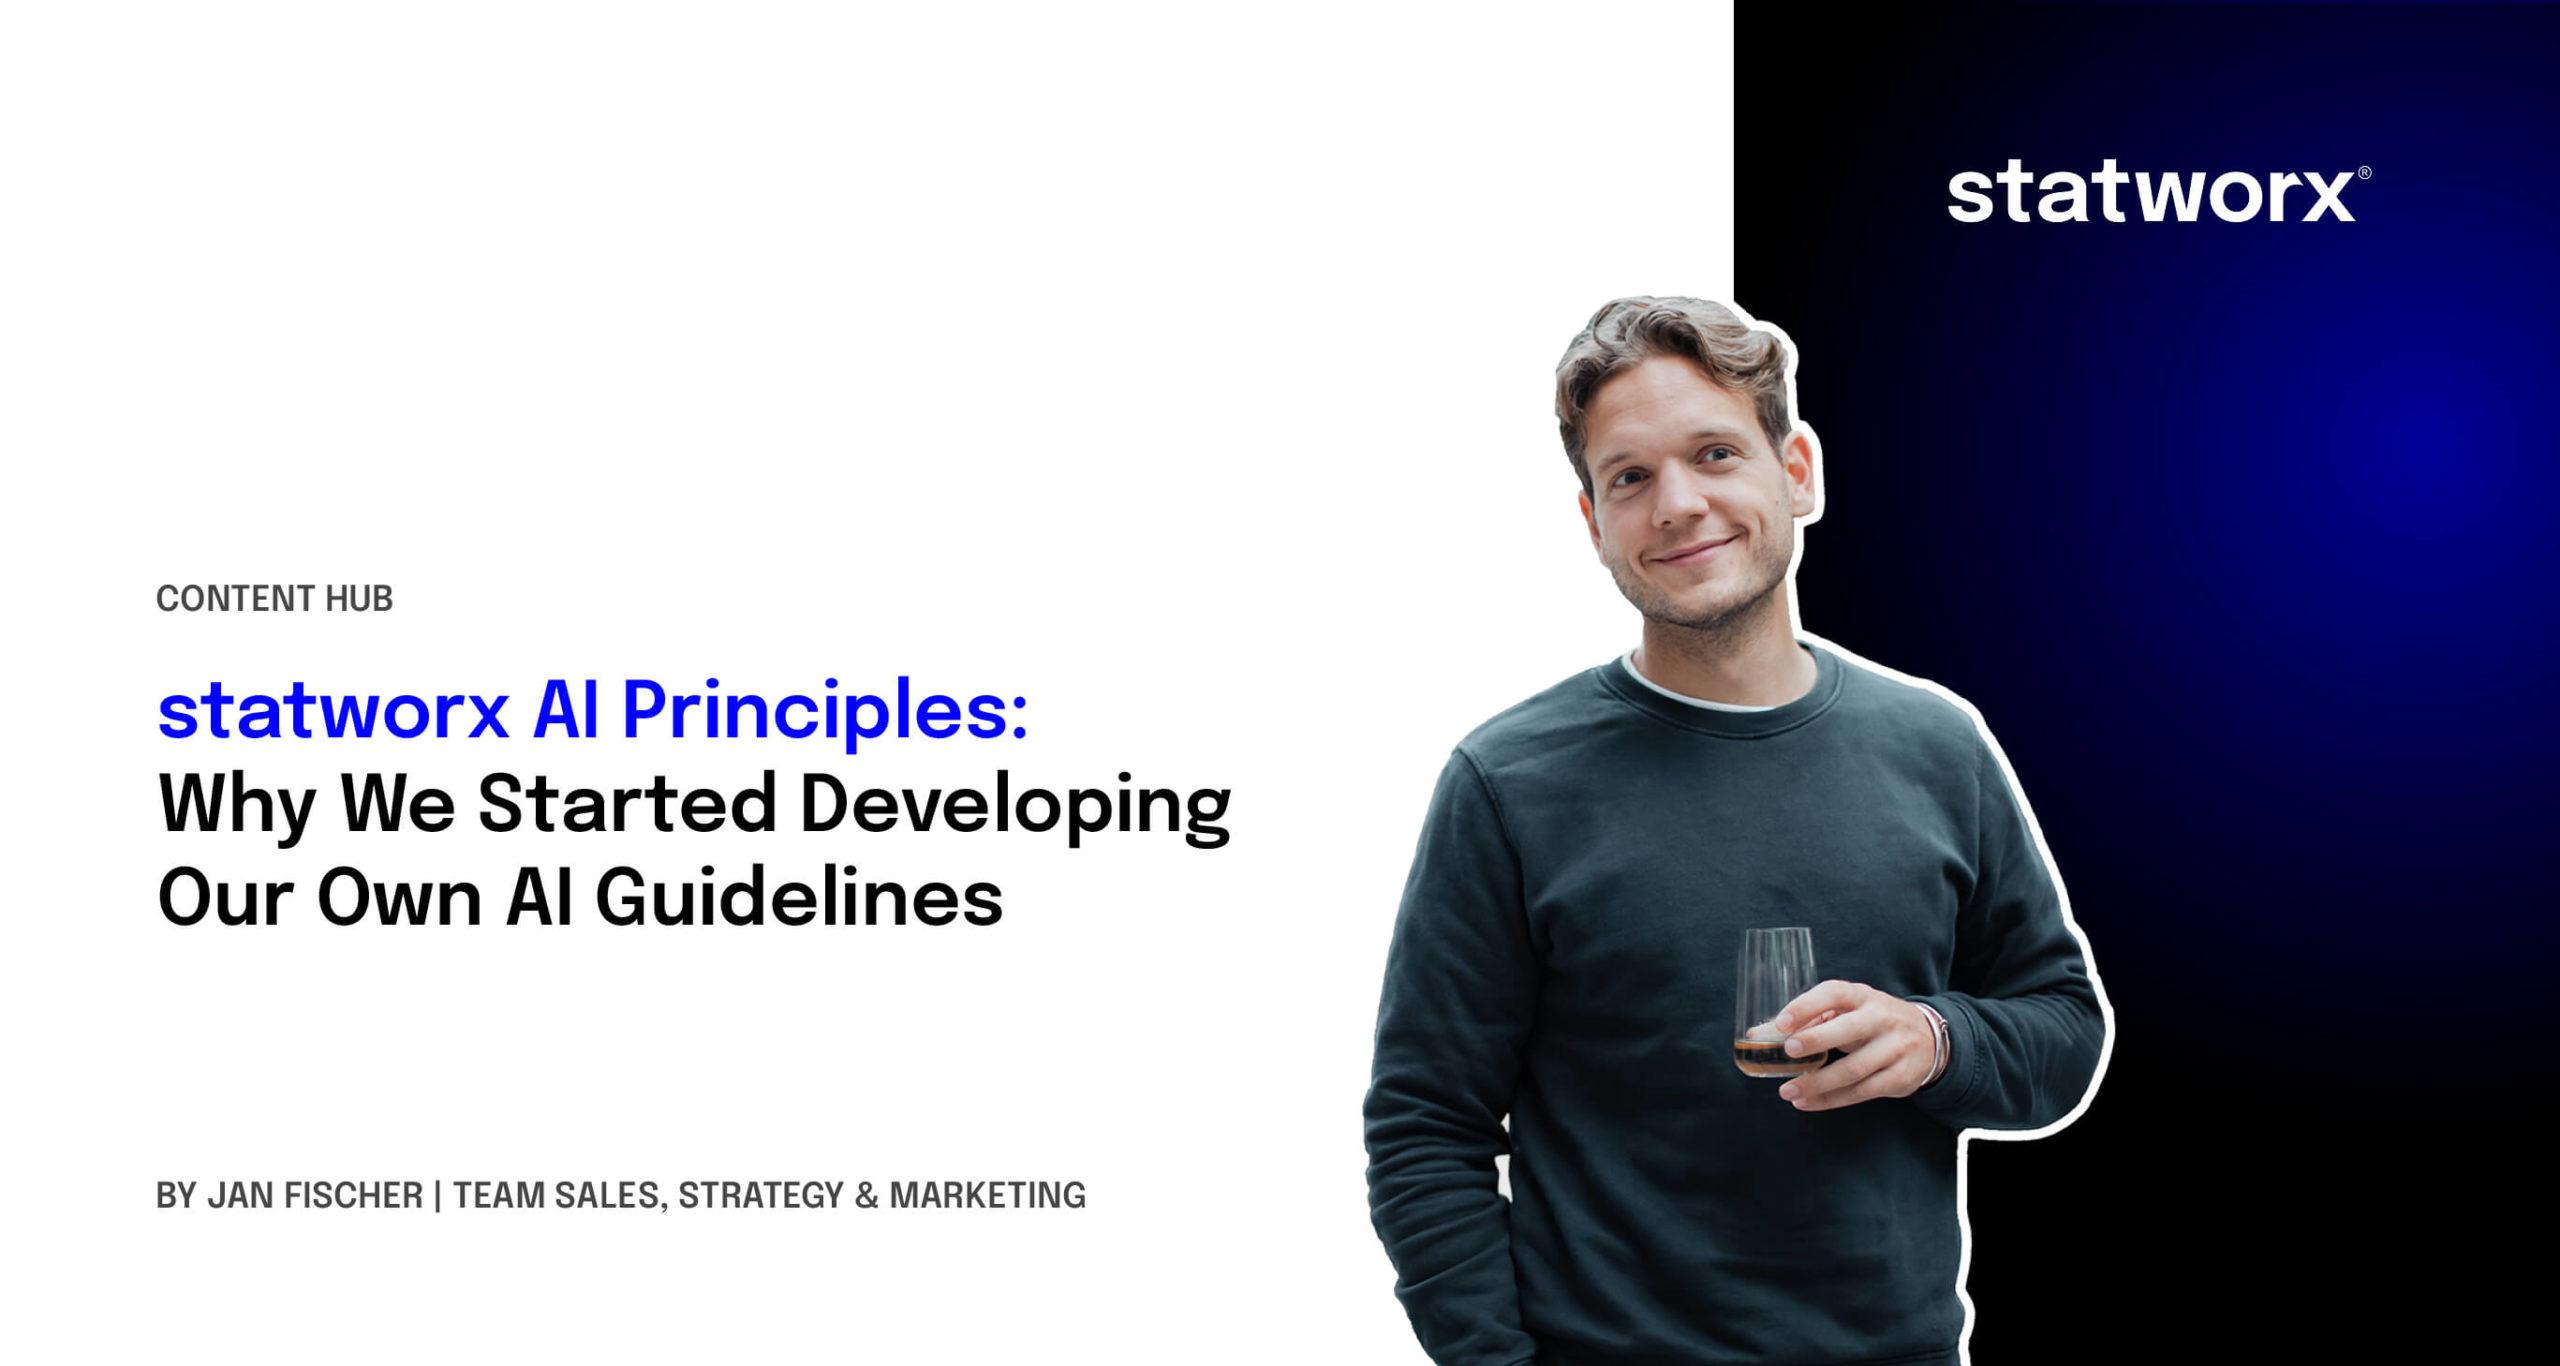 statworx AI Principles: Why We Started Developing Our Own AI Guidelines